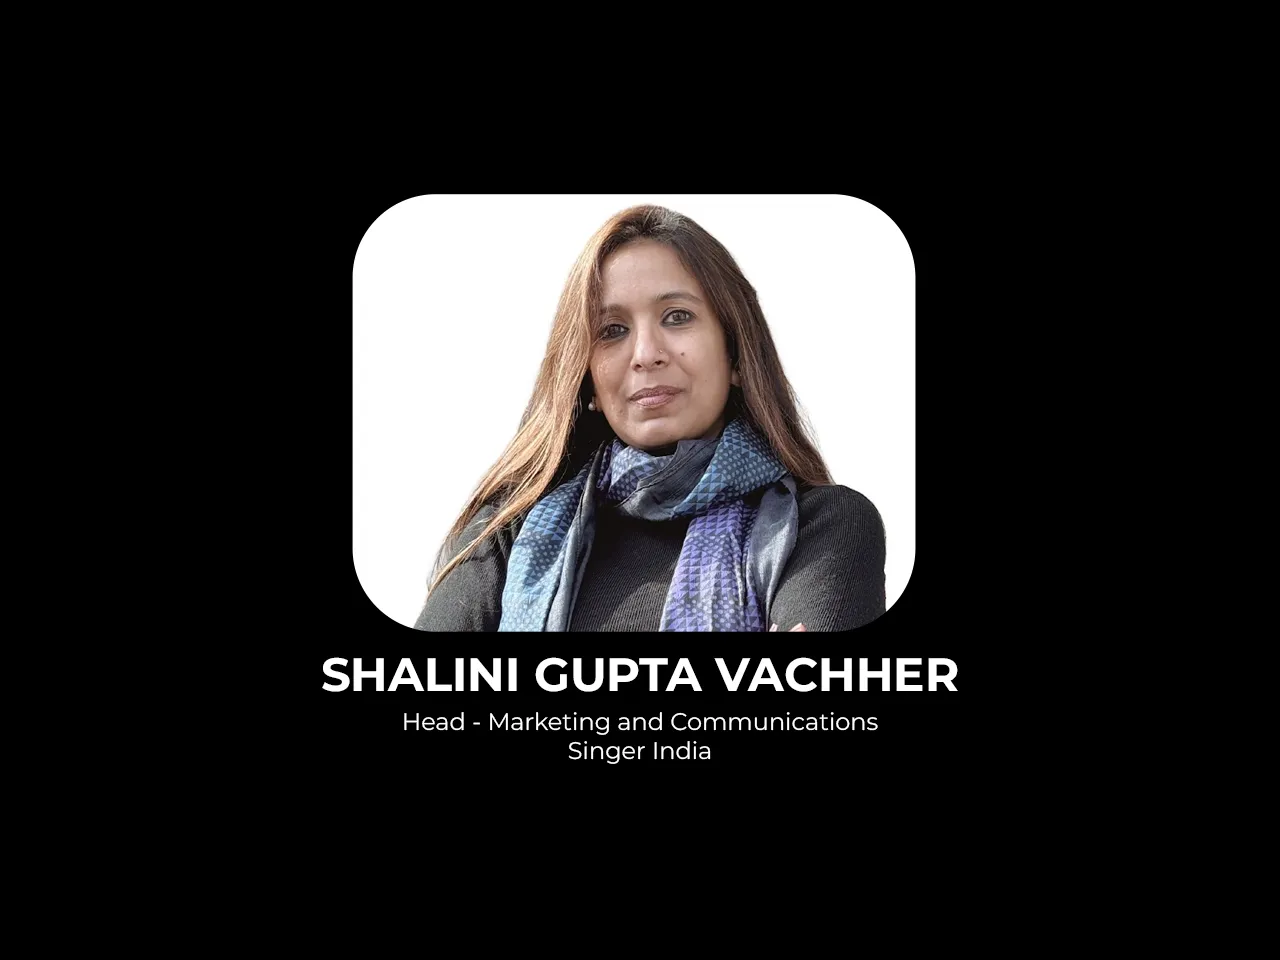 Singer India appoints Shalini Gupta Vachher as Head of Marketing & Comms